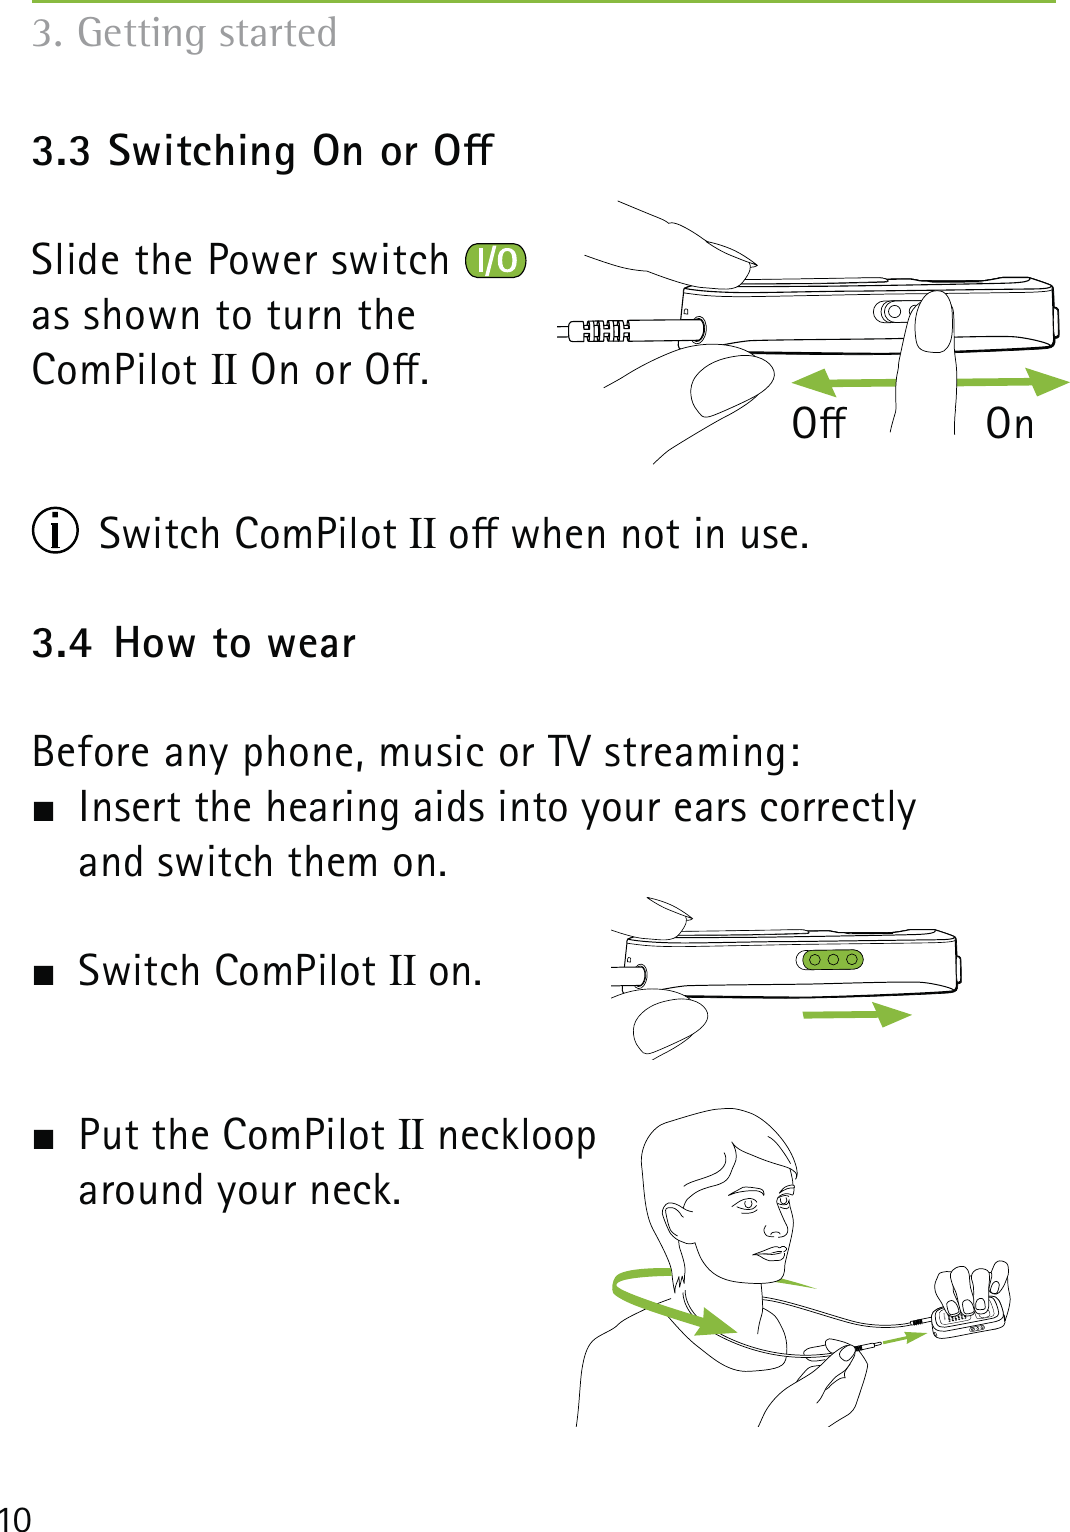 103. Getting started3.3 Switching On or OSlide the Power switch   as shown to turn the ComPilot II On or O.                   O           On Switch ComPilot II o when not in use.3.4  How to wearBefore any phone, music or TV streaming:  Insert the hearing aids into your ears correctly  and switch them on. Switch ComPilot II on.  Put the ComPilot II neckloop  around your neck.